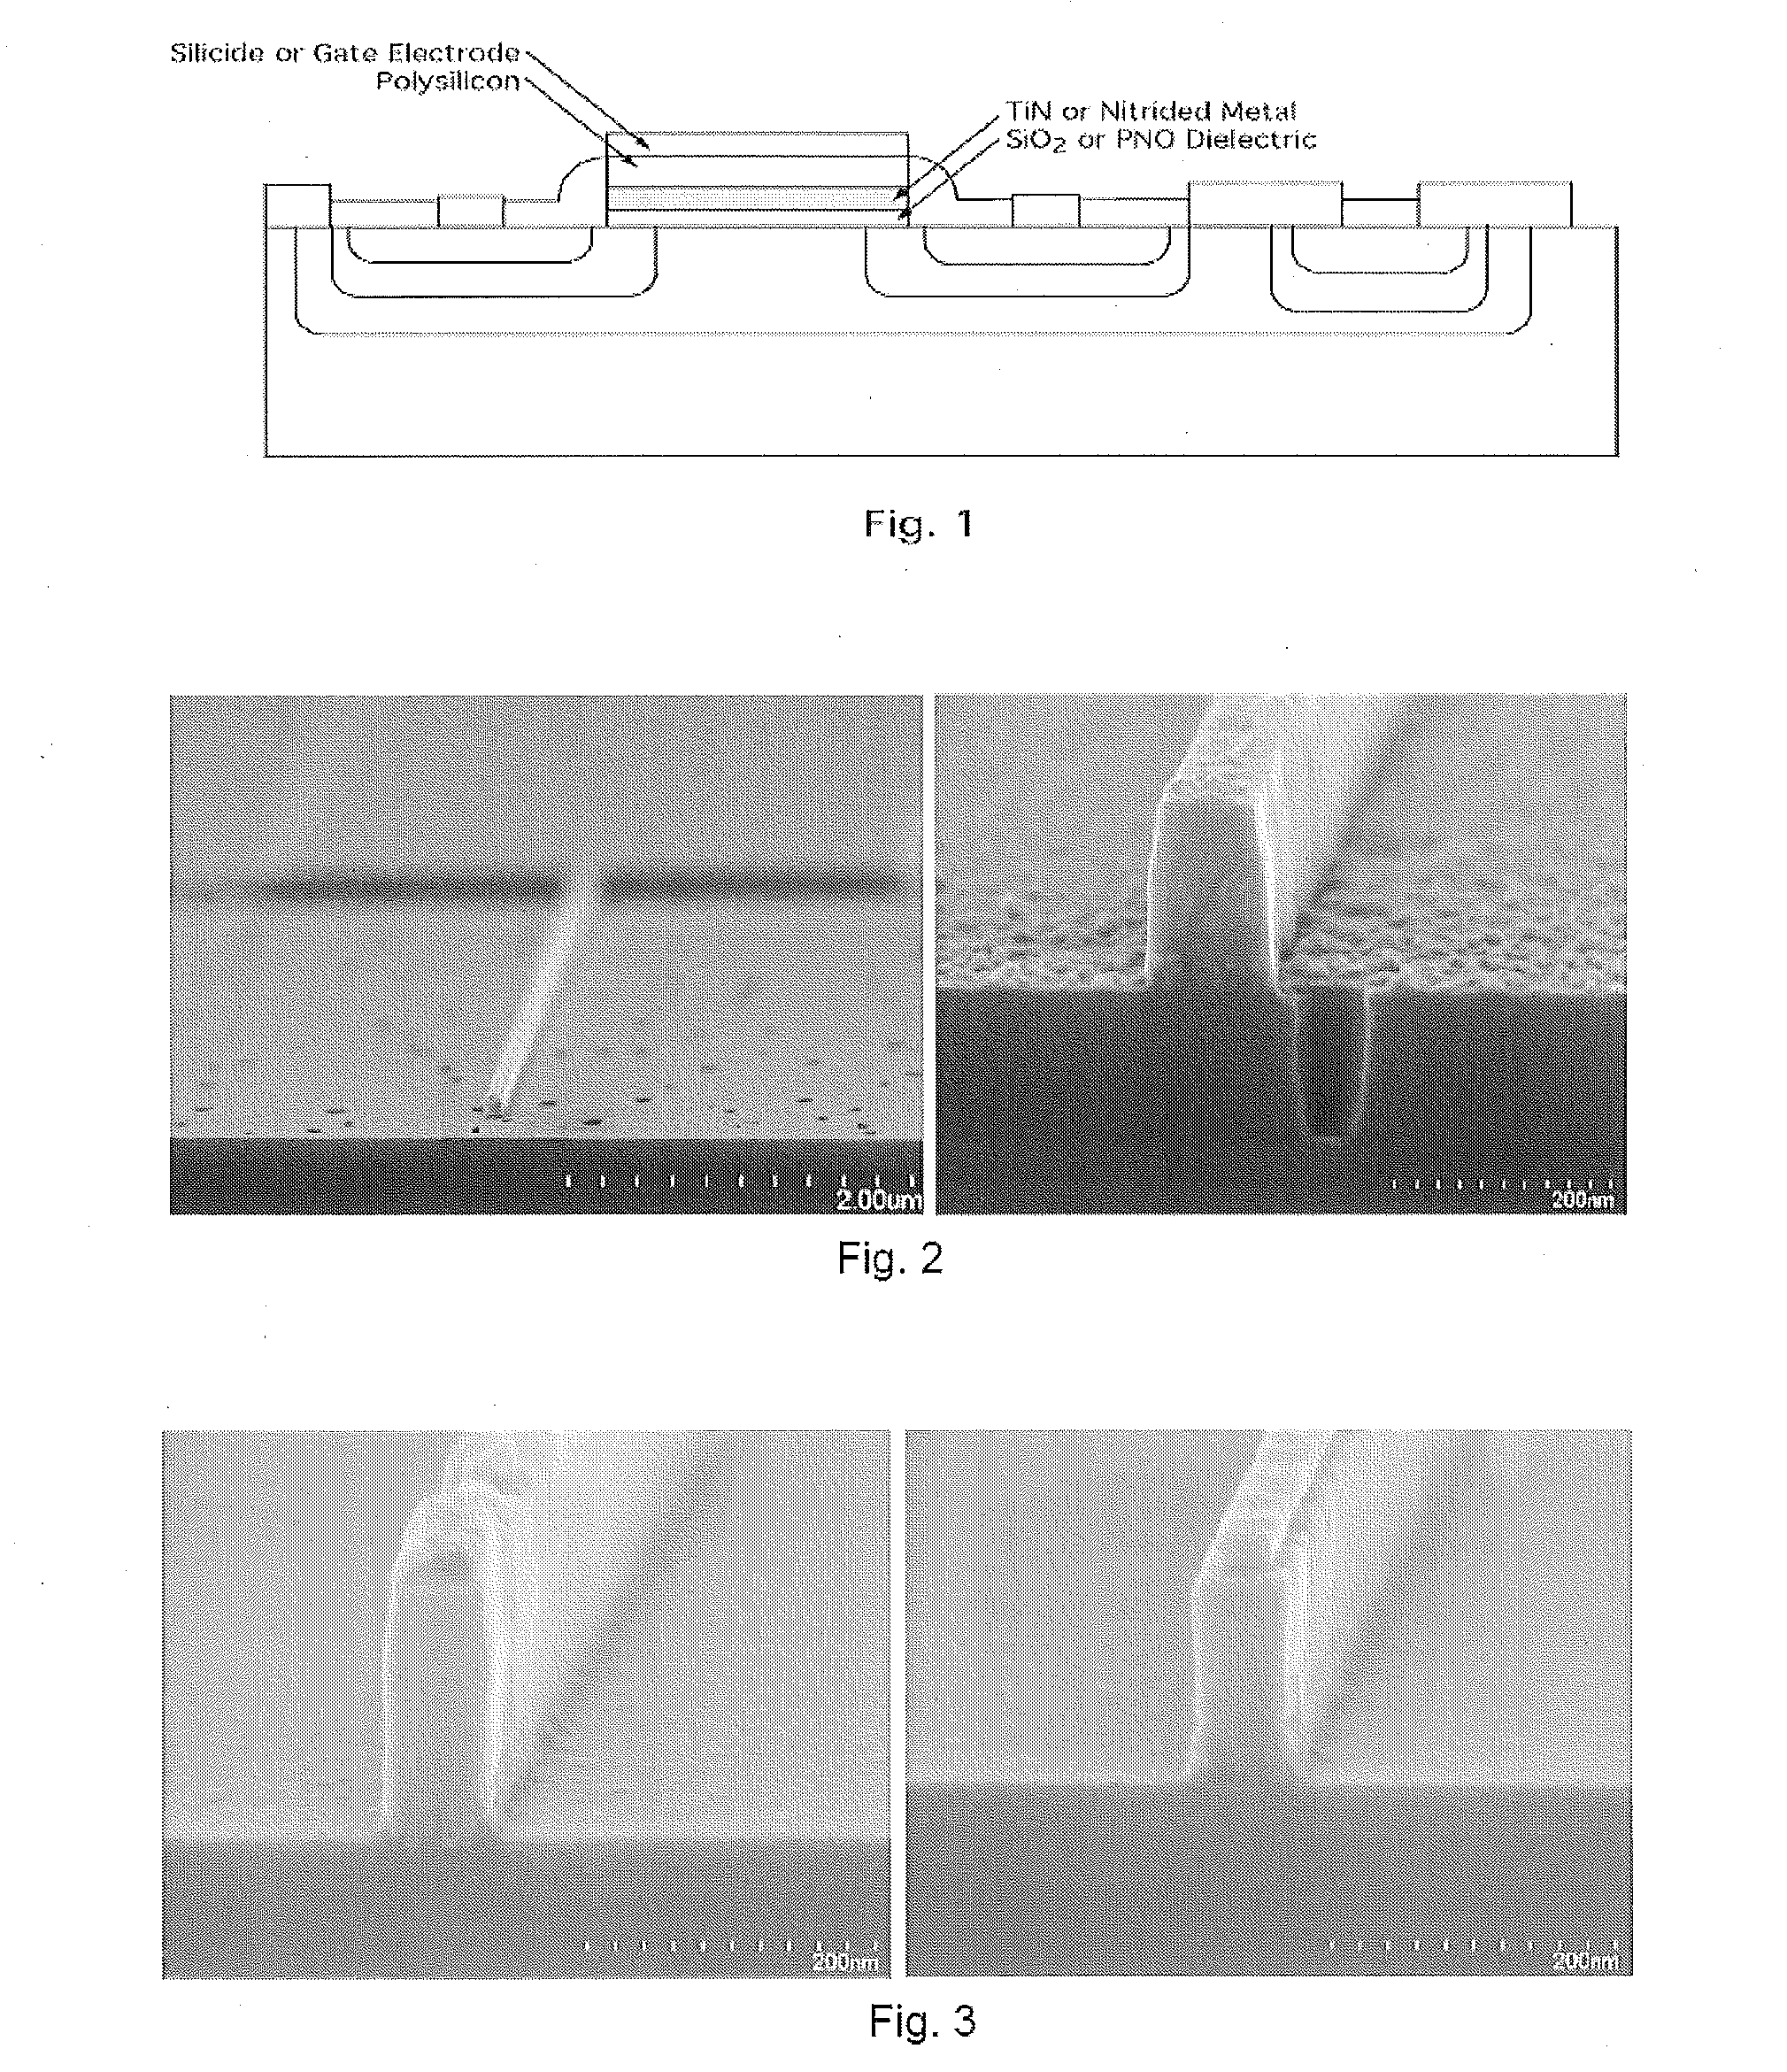 Methods of fabricating field effect transistors including titanium nitride gates over partially nitrided oxide and devices so fabricated